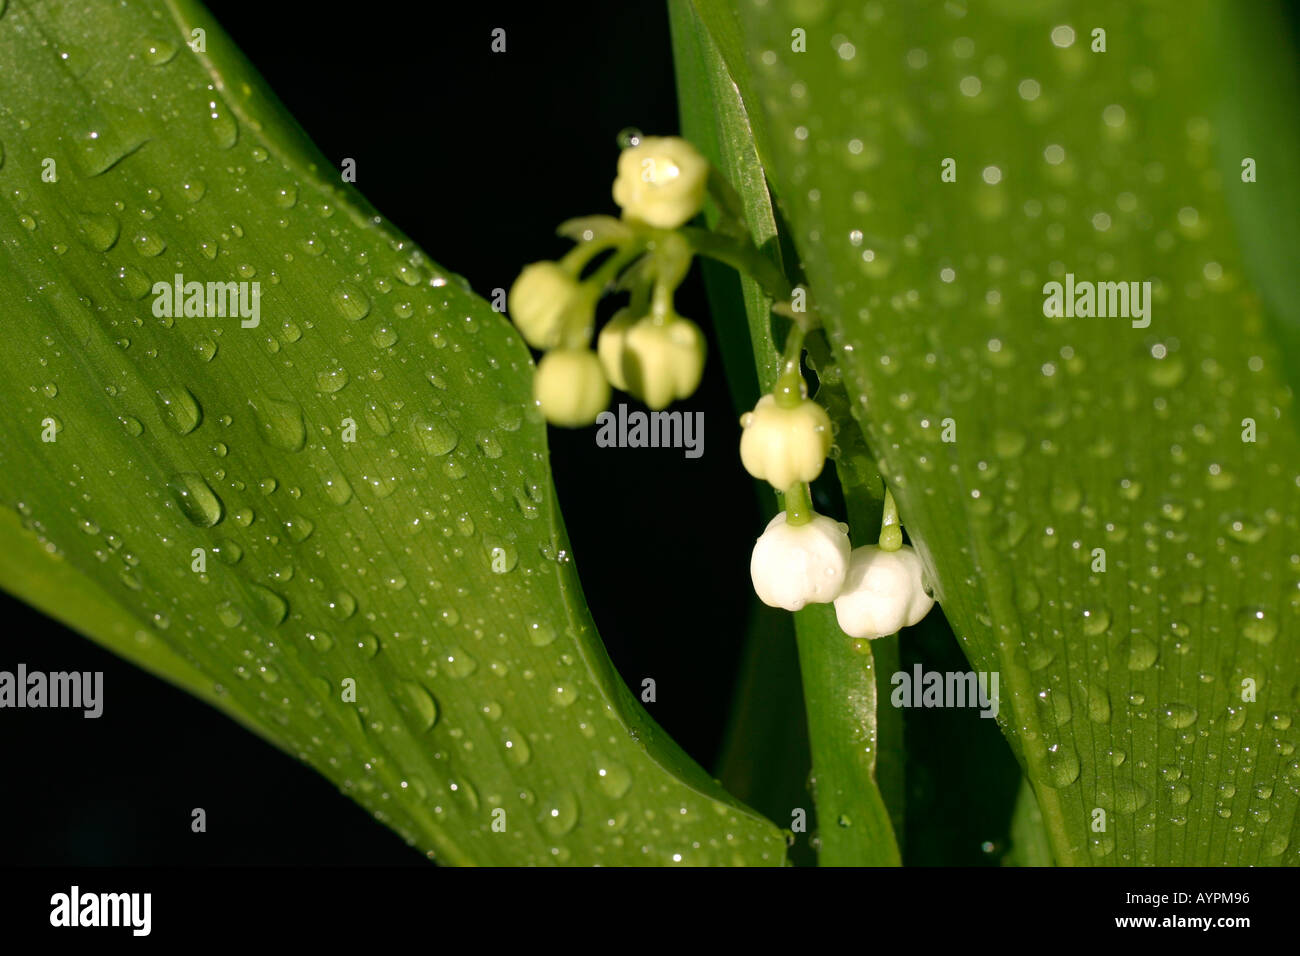 Small white buds blossom amidst wet leaves as water droplets form on them Stock Photo